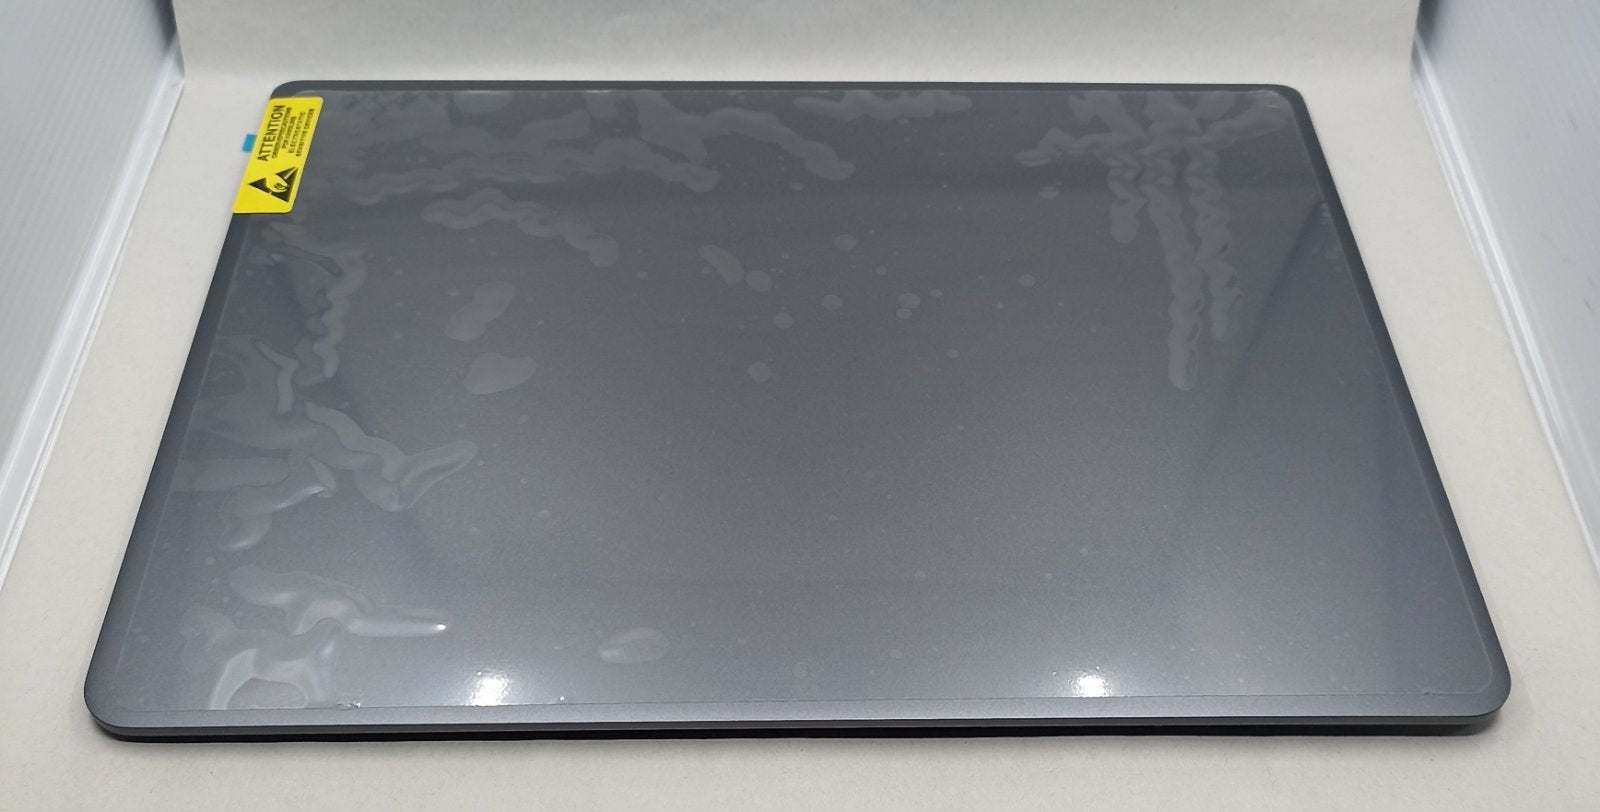 Replacement LCD Cover For Lenovo IdeaPad 5 Pro-14ACN6 WL